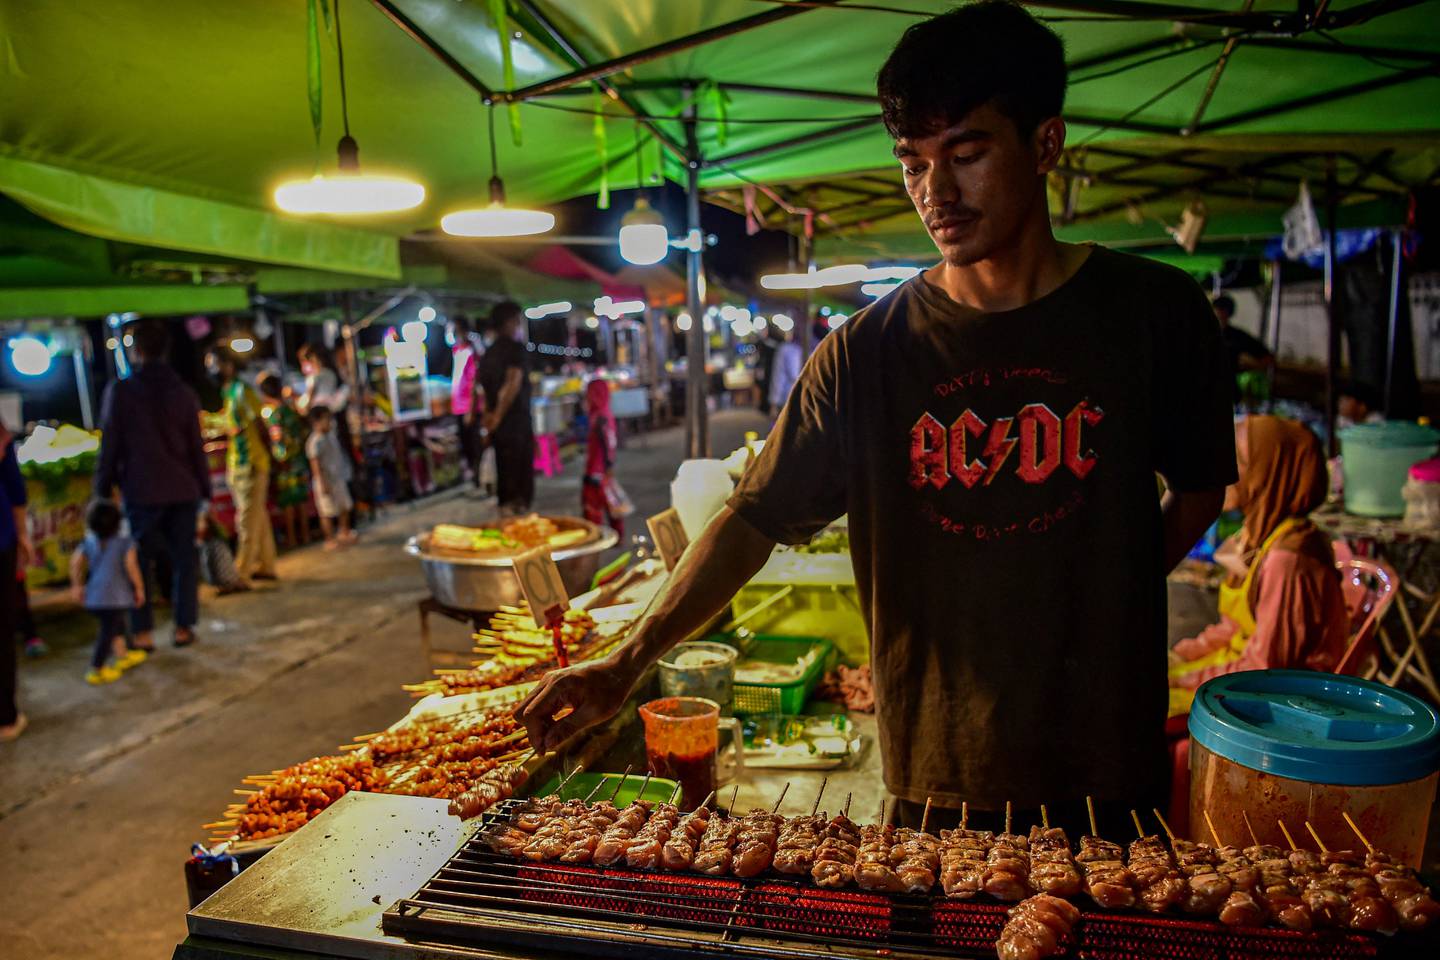 Street food stalls at night market in Narathiwat province, Southern Thailand.  AFPMore